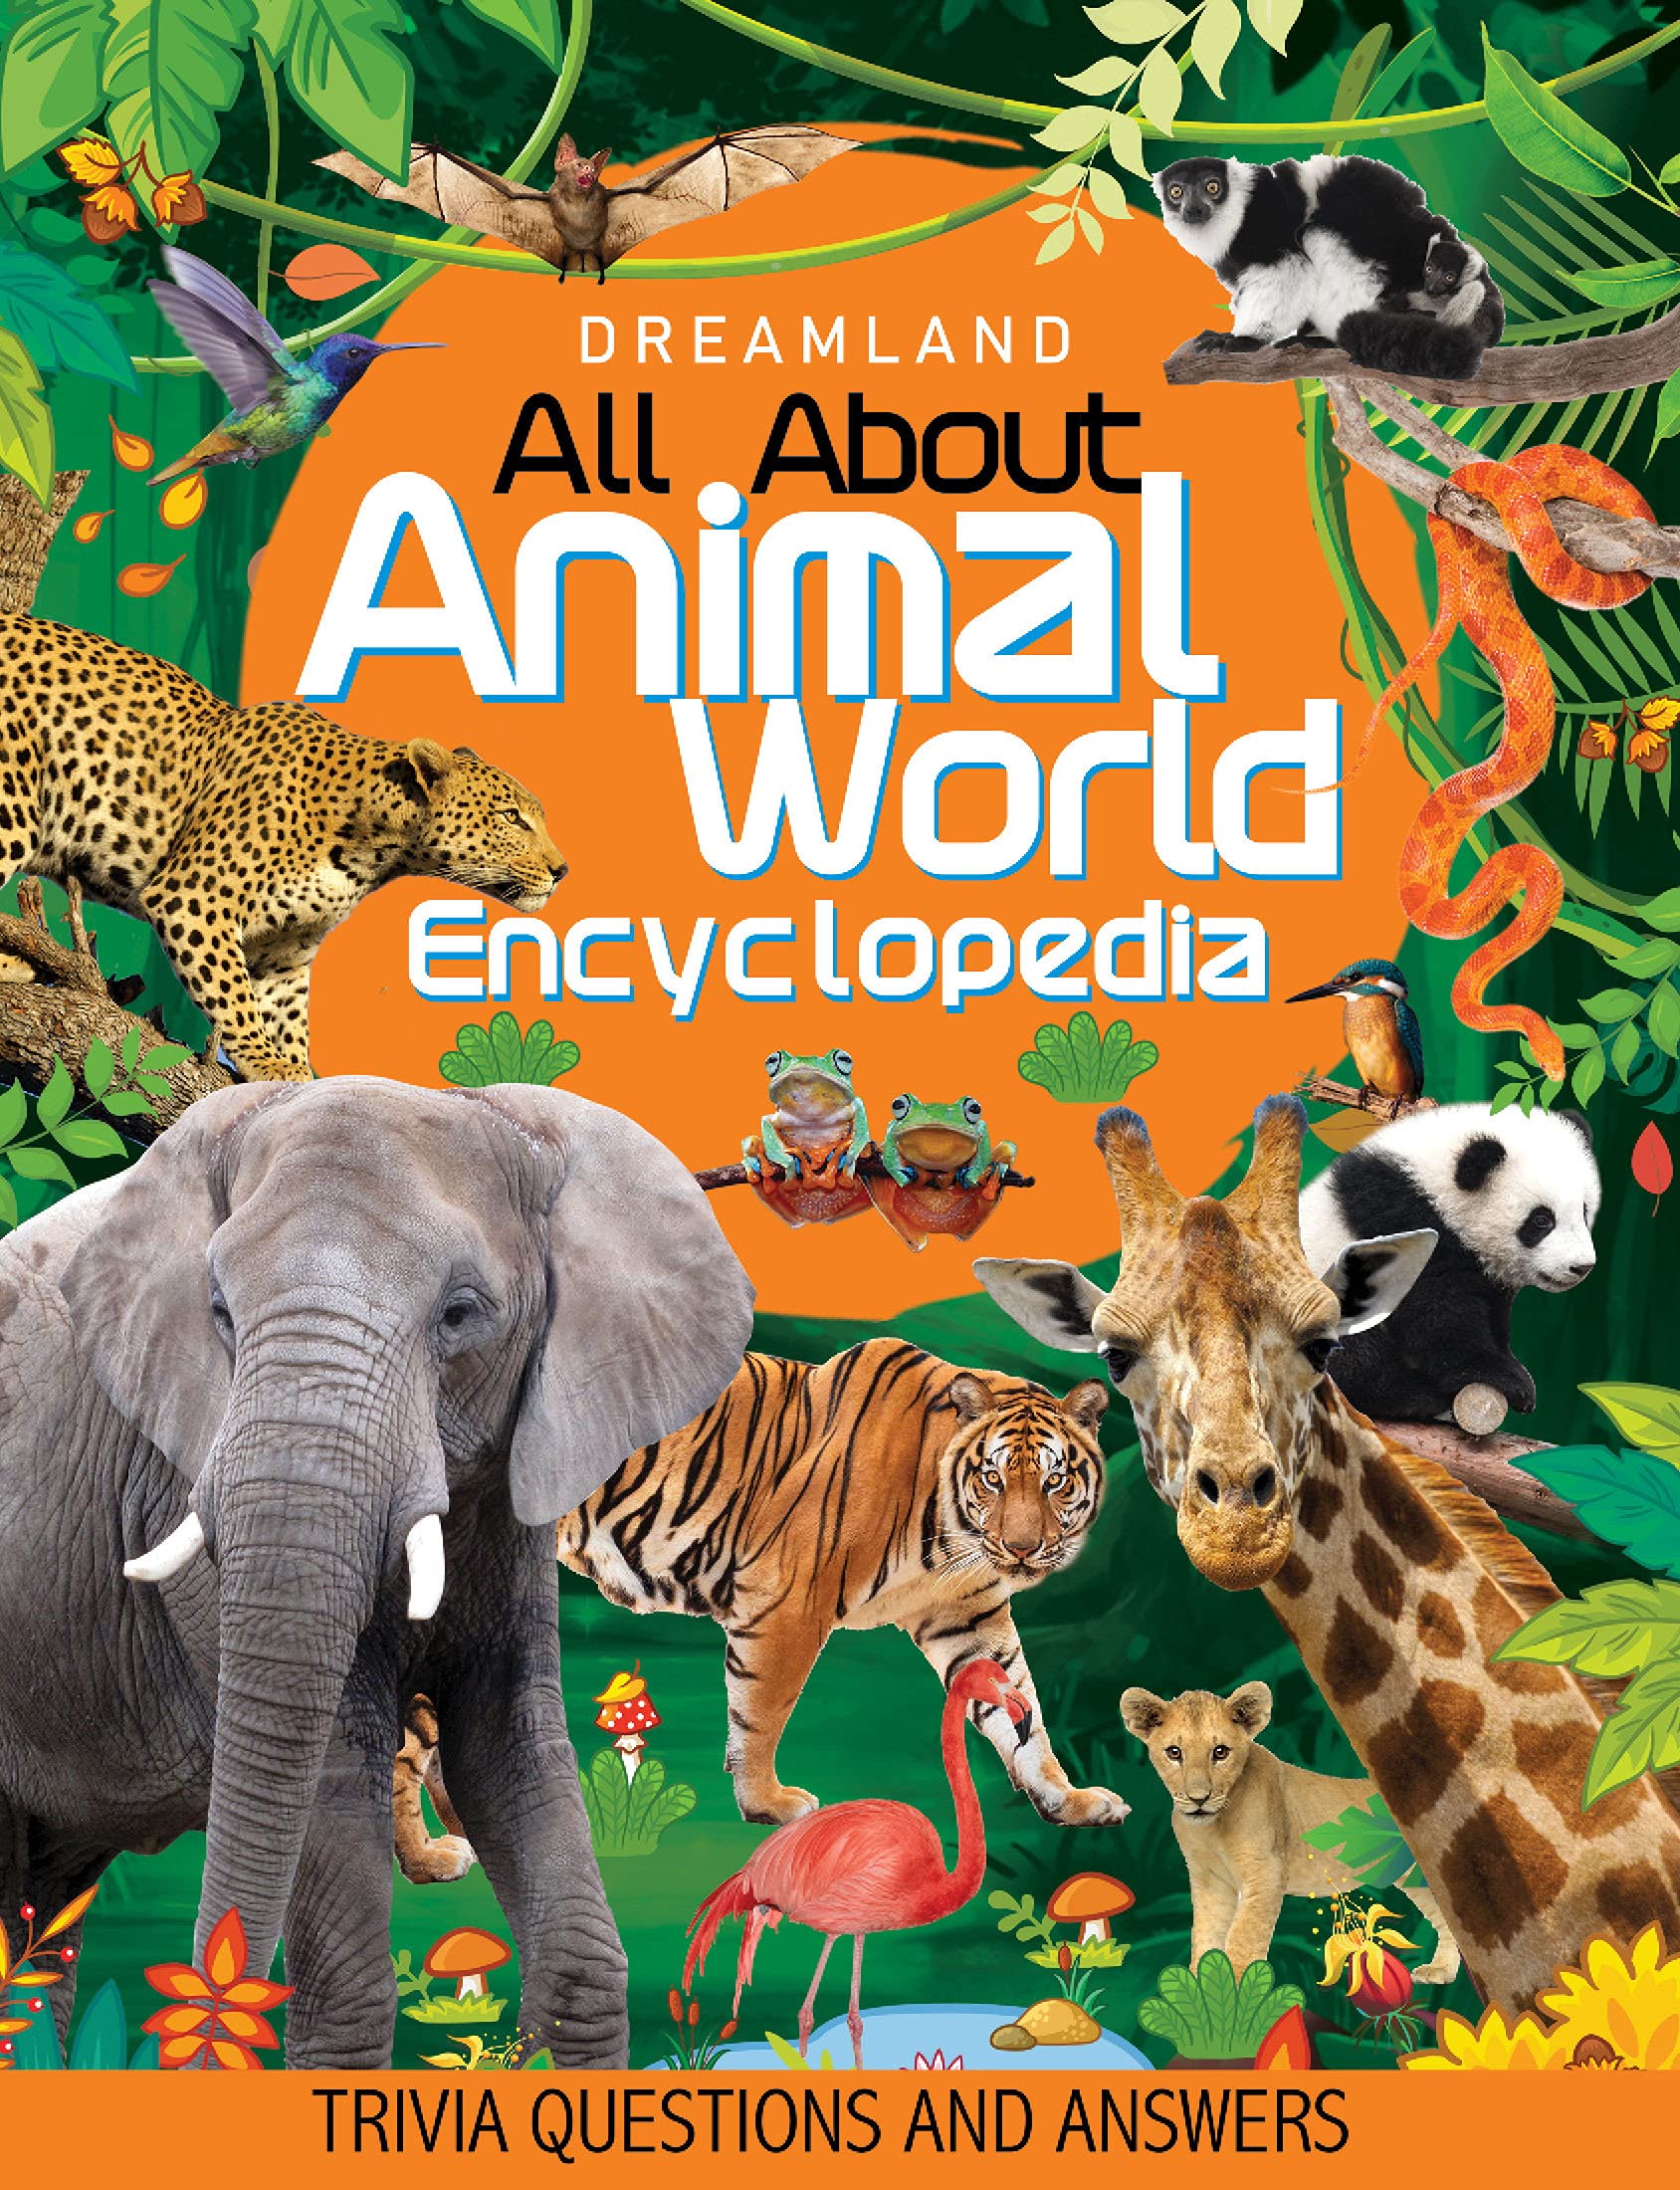 Animal World Children Encyclopedia: All About Trivia Questions and Answers